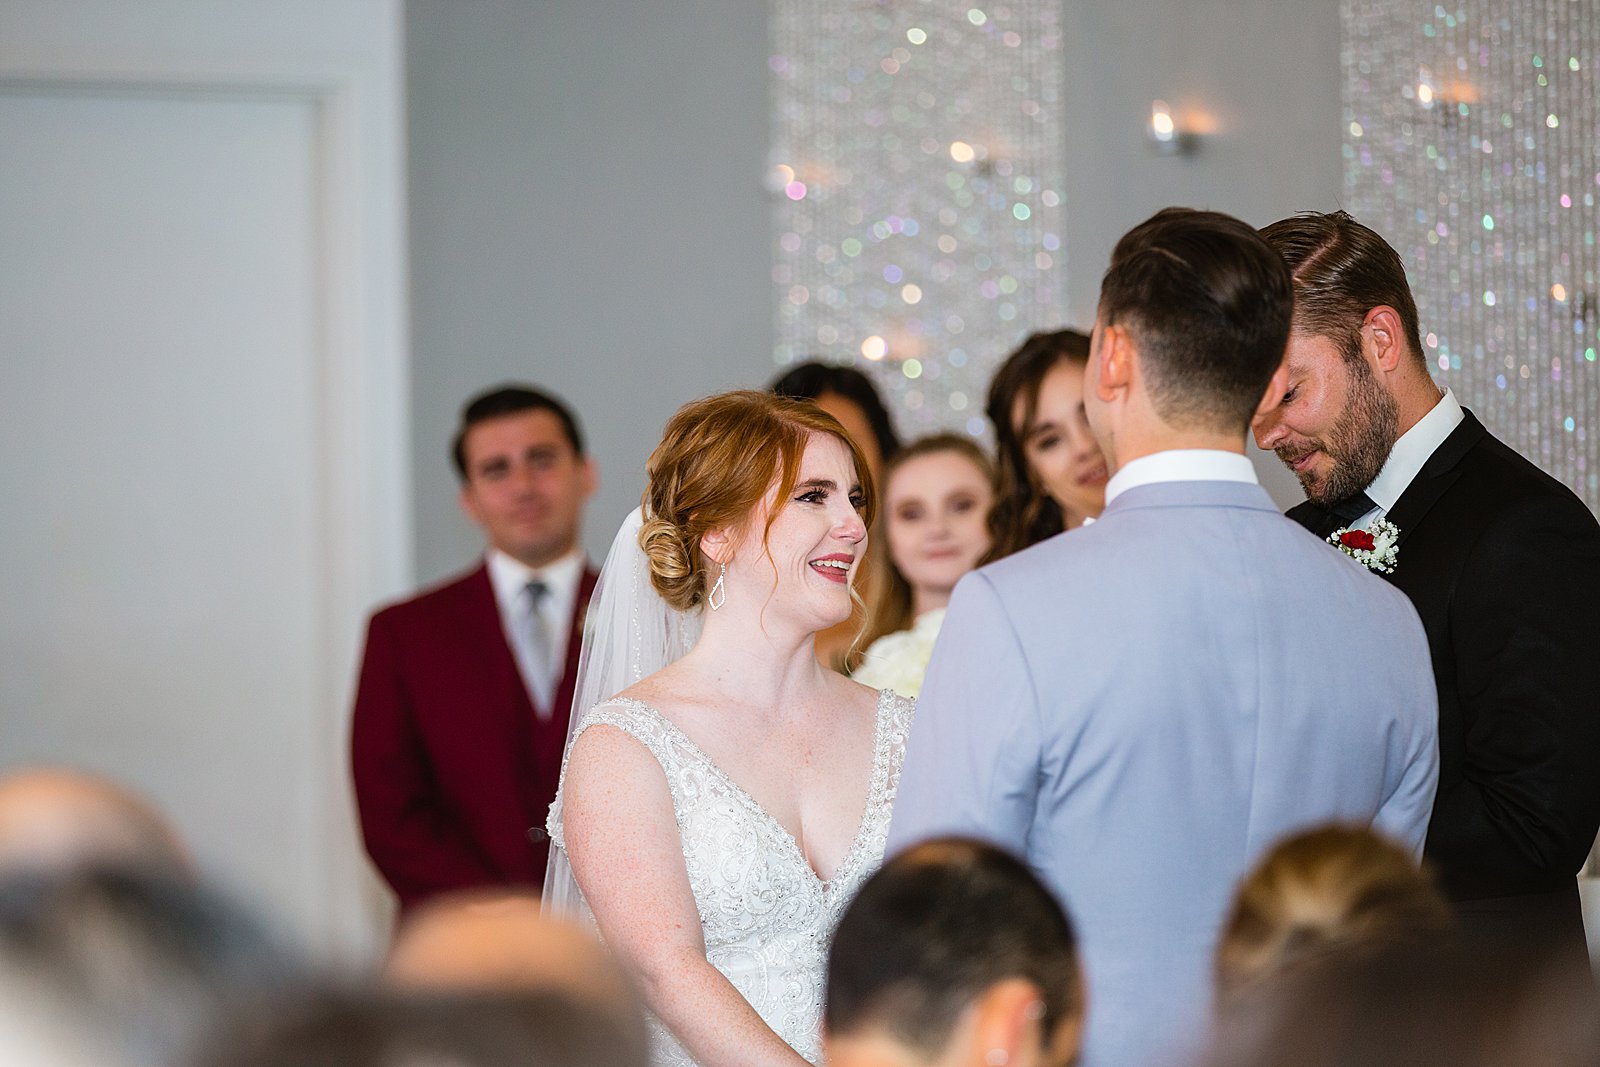 Bride looking at her groom during their wedding ceremony at SoHo63 by Chandler wedding photographer PMA Photography.